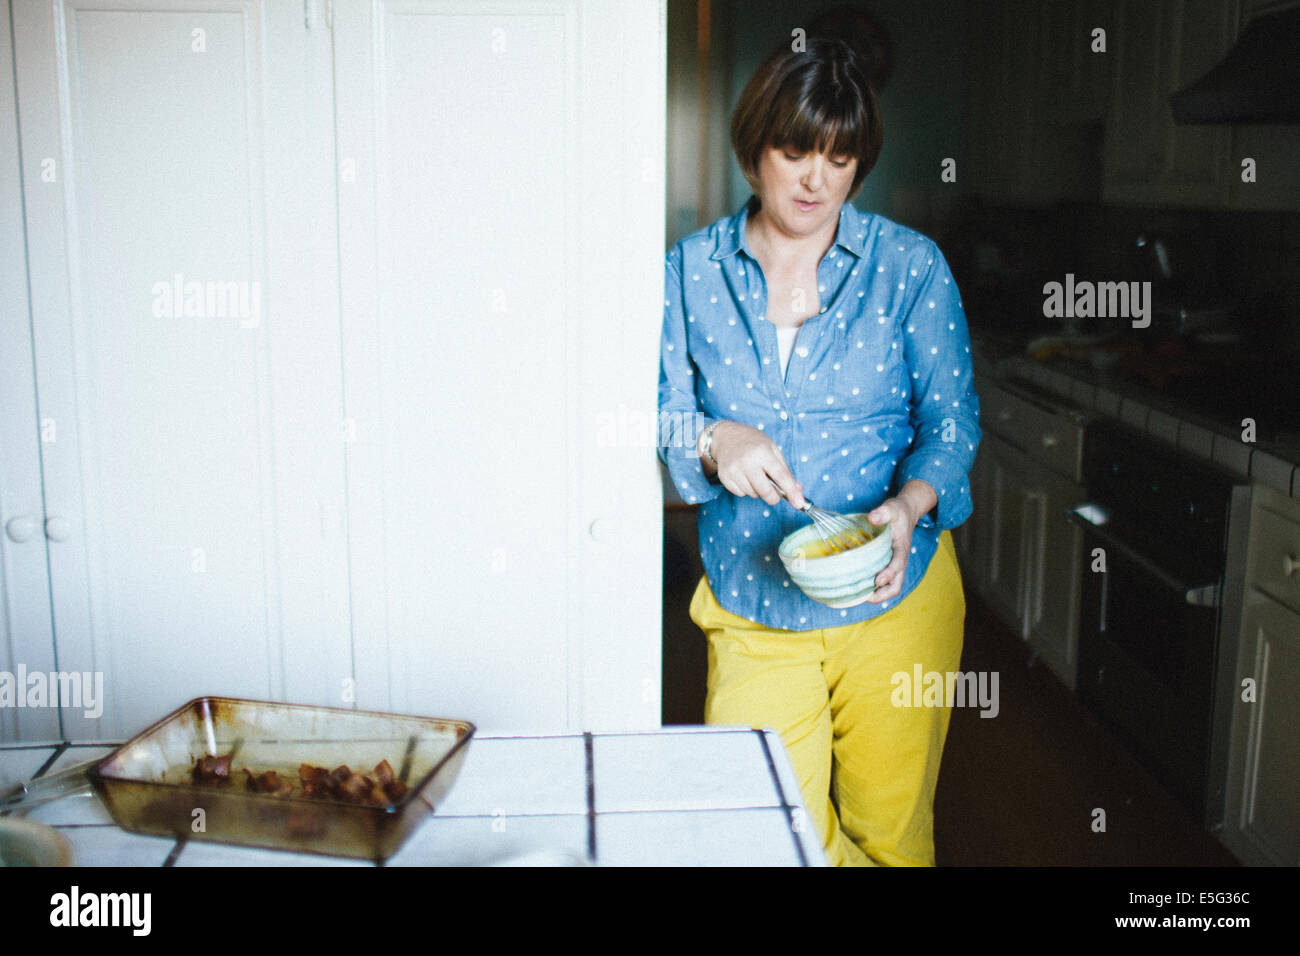 Woman cooking Stock Photo